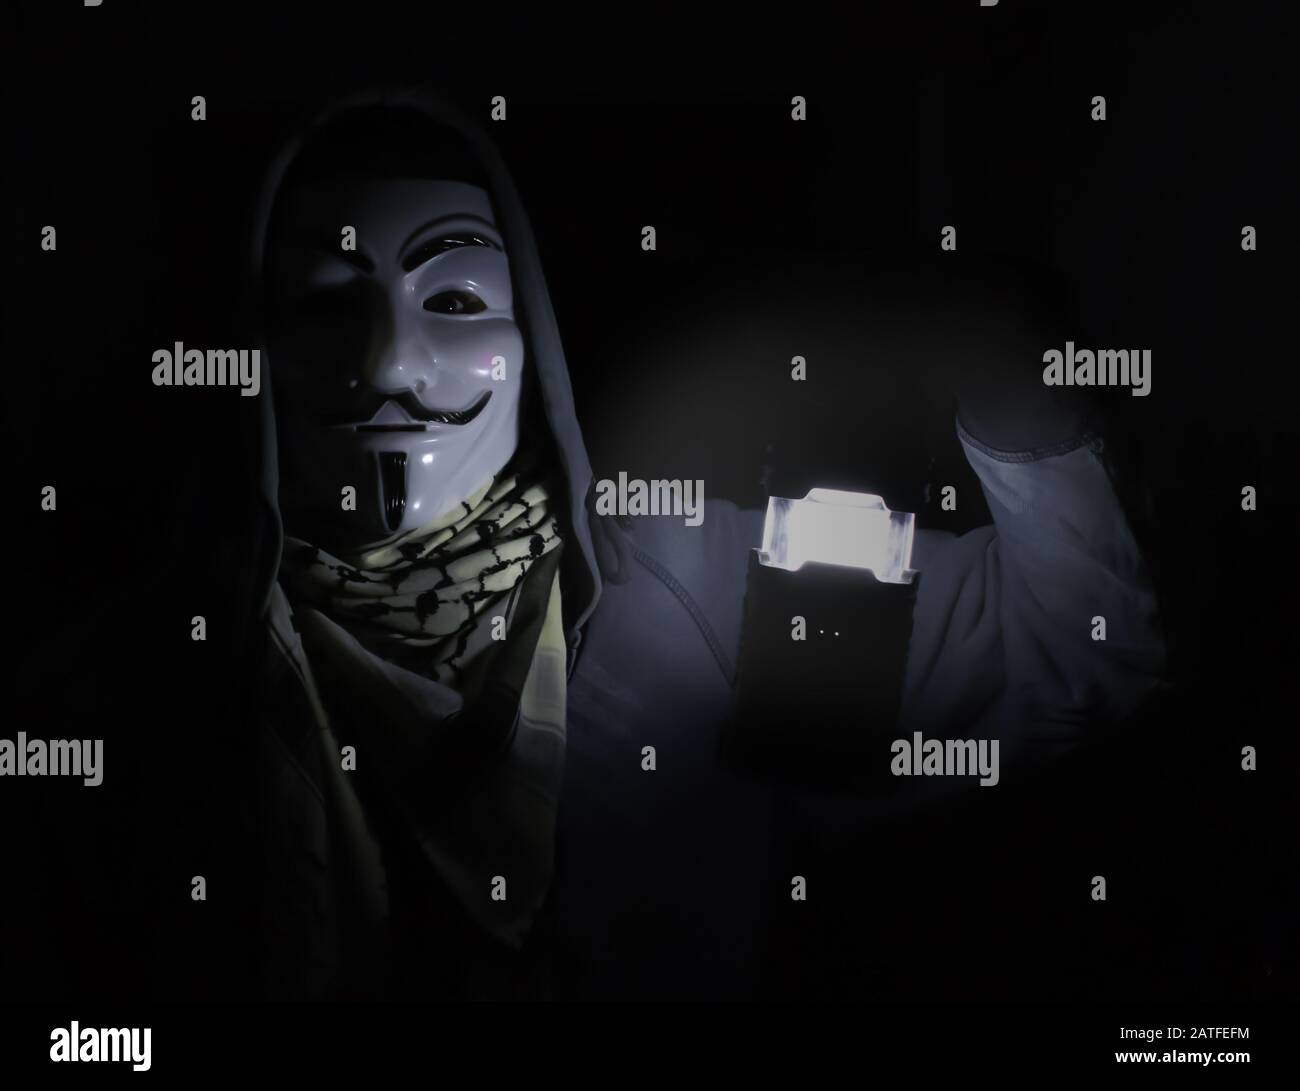 person wearing guy fawkes mask in obscurity Stock Photo